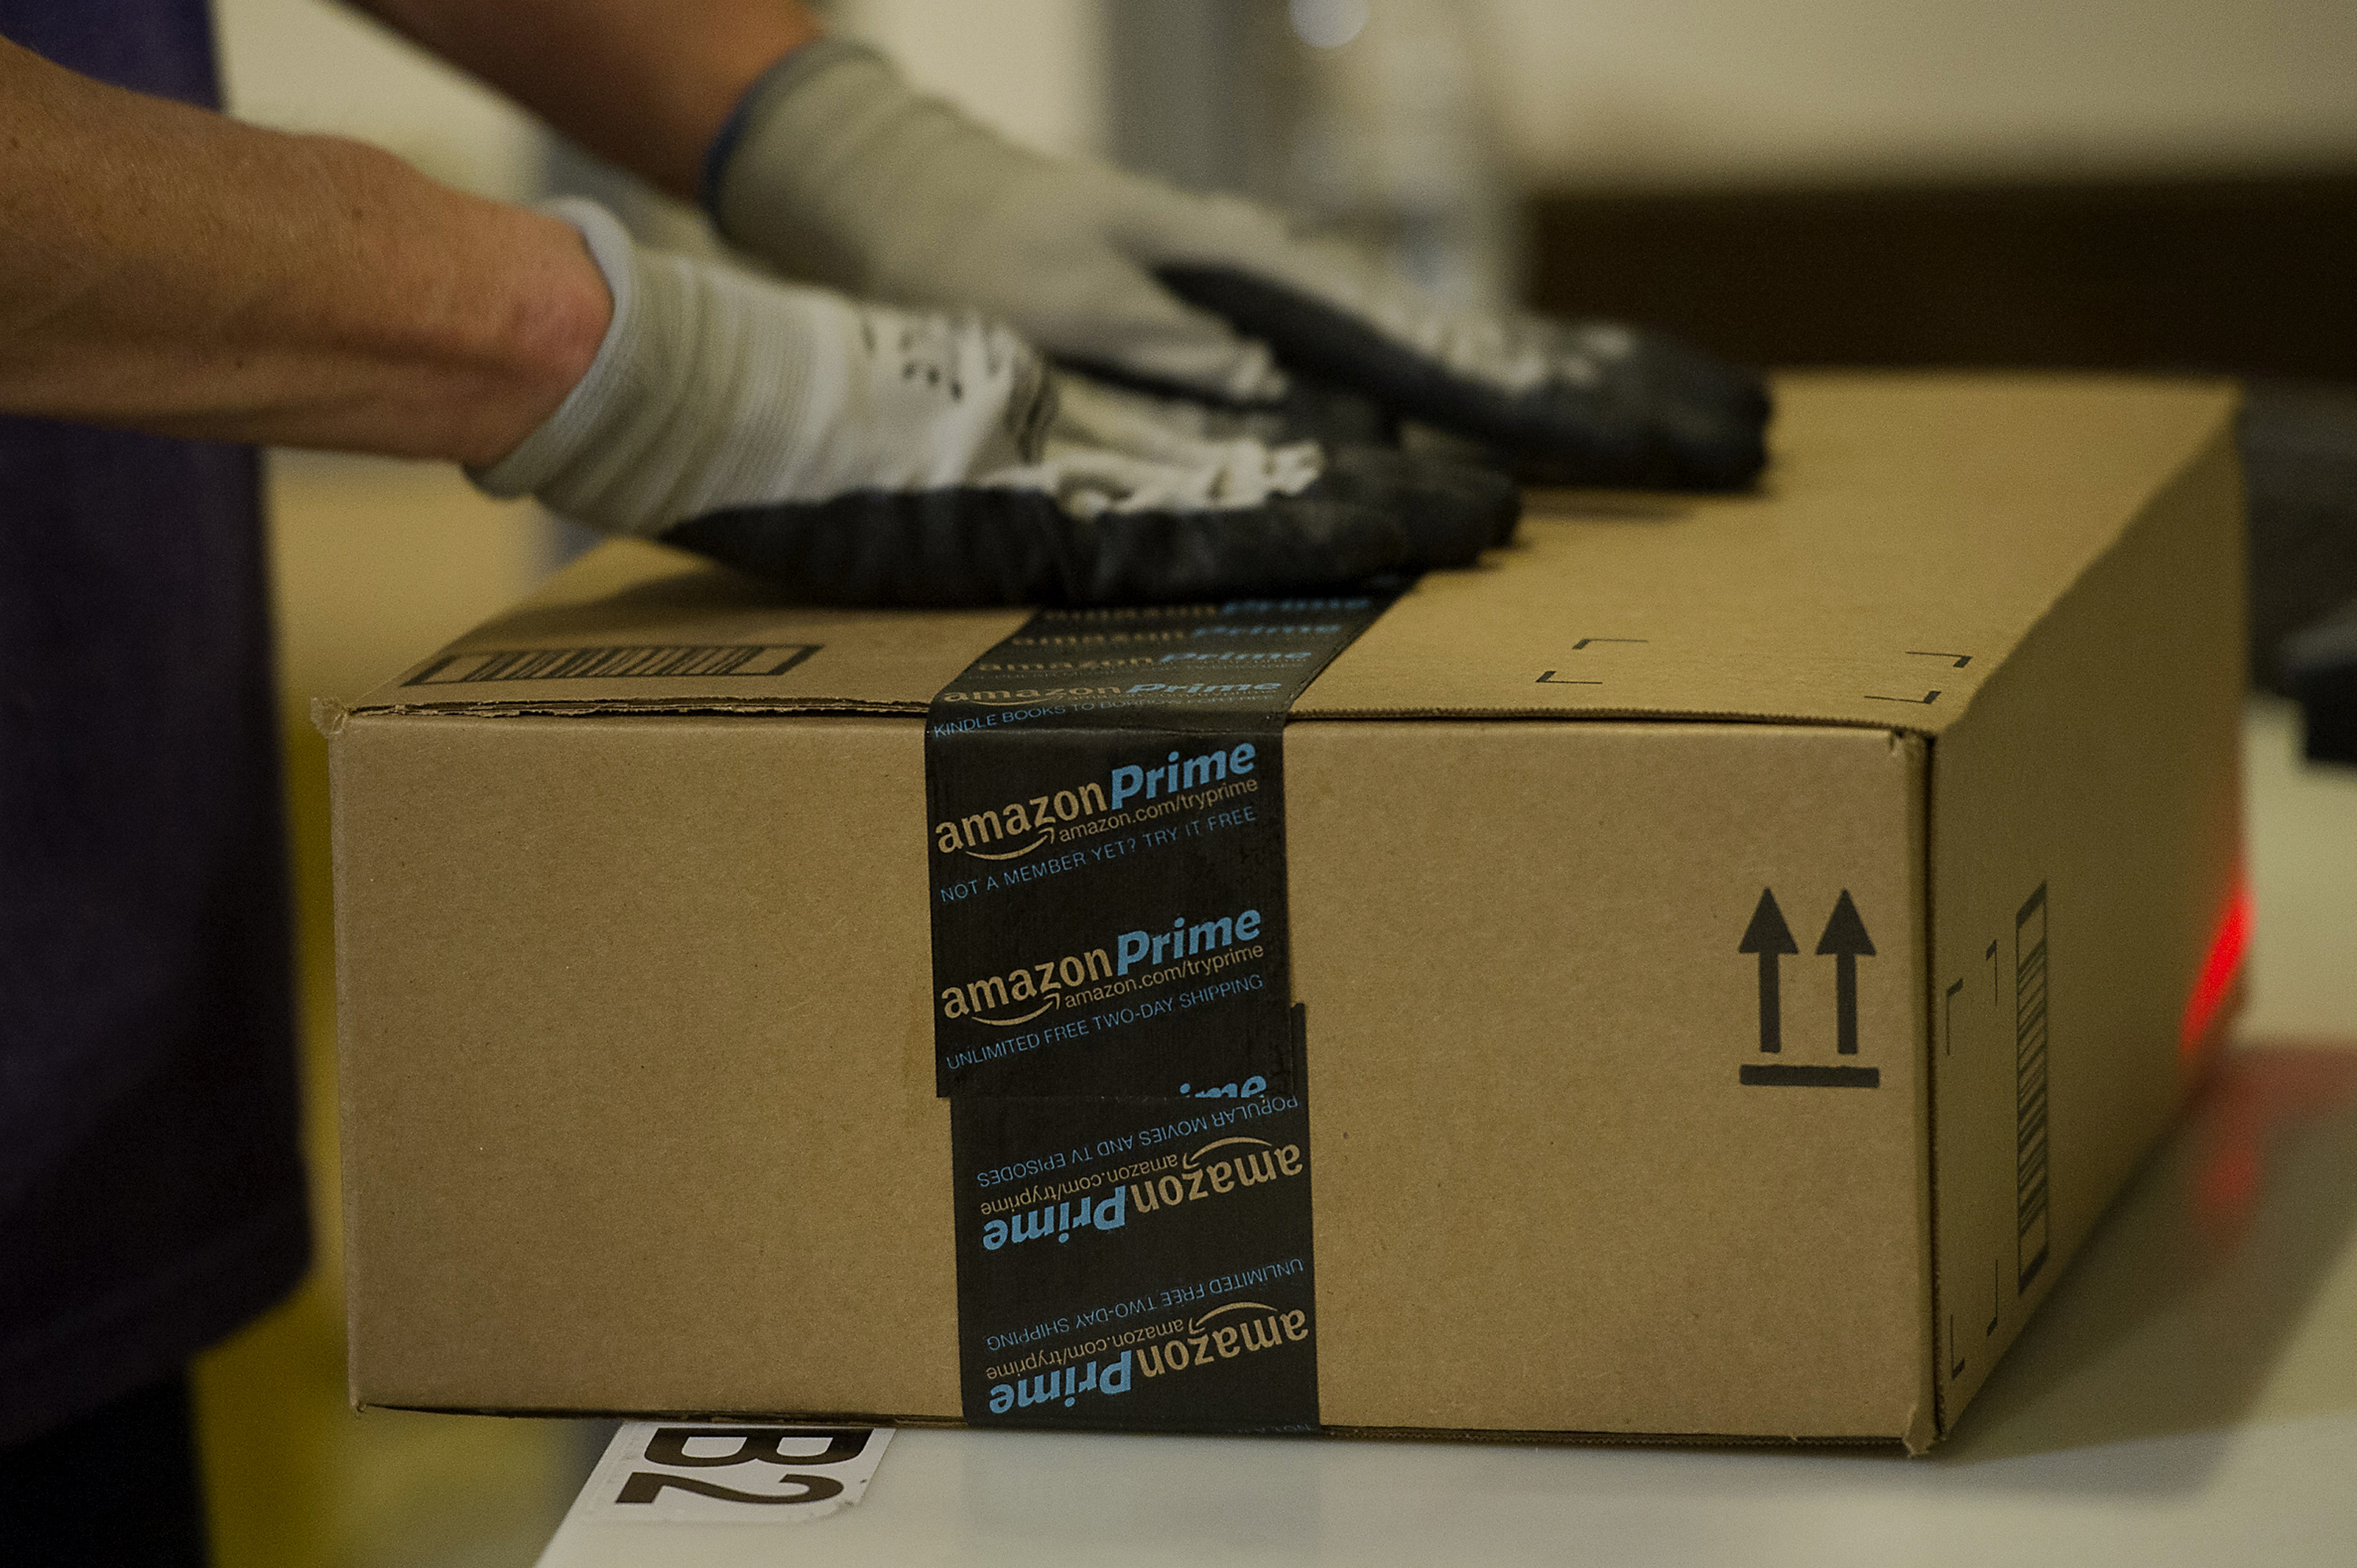 An employee seals a box at the Amazon.com Inc. fulfillment center in Phoenix, Arizona on Dec. 2, 2013. (Bloomberg/Getty Images)